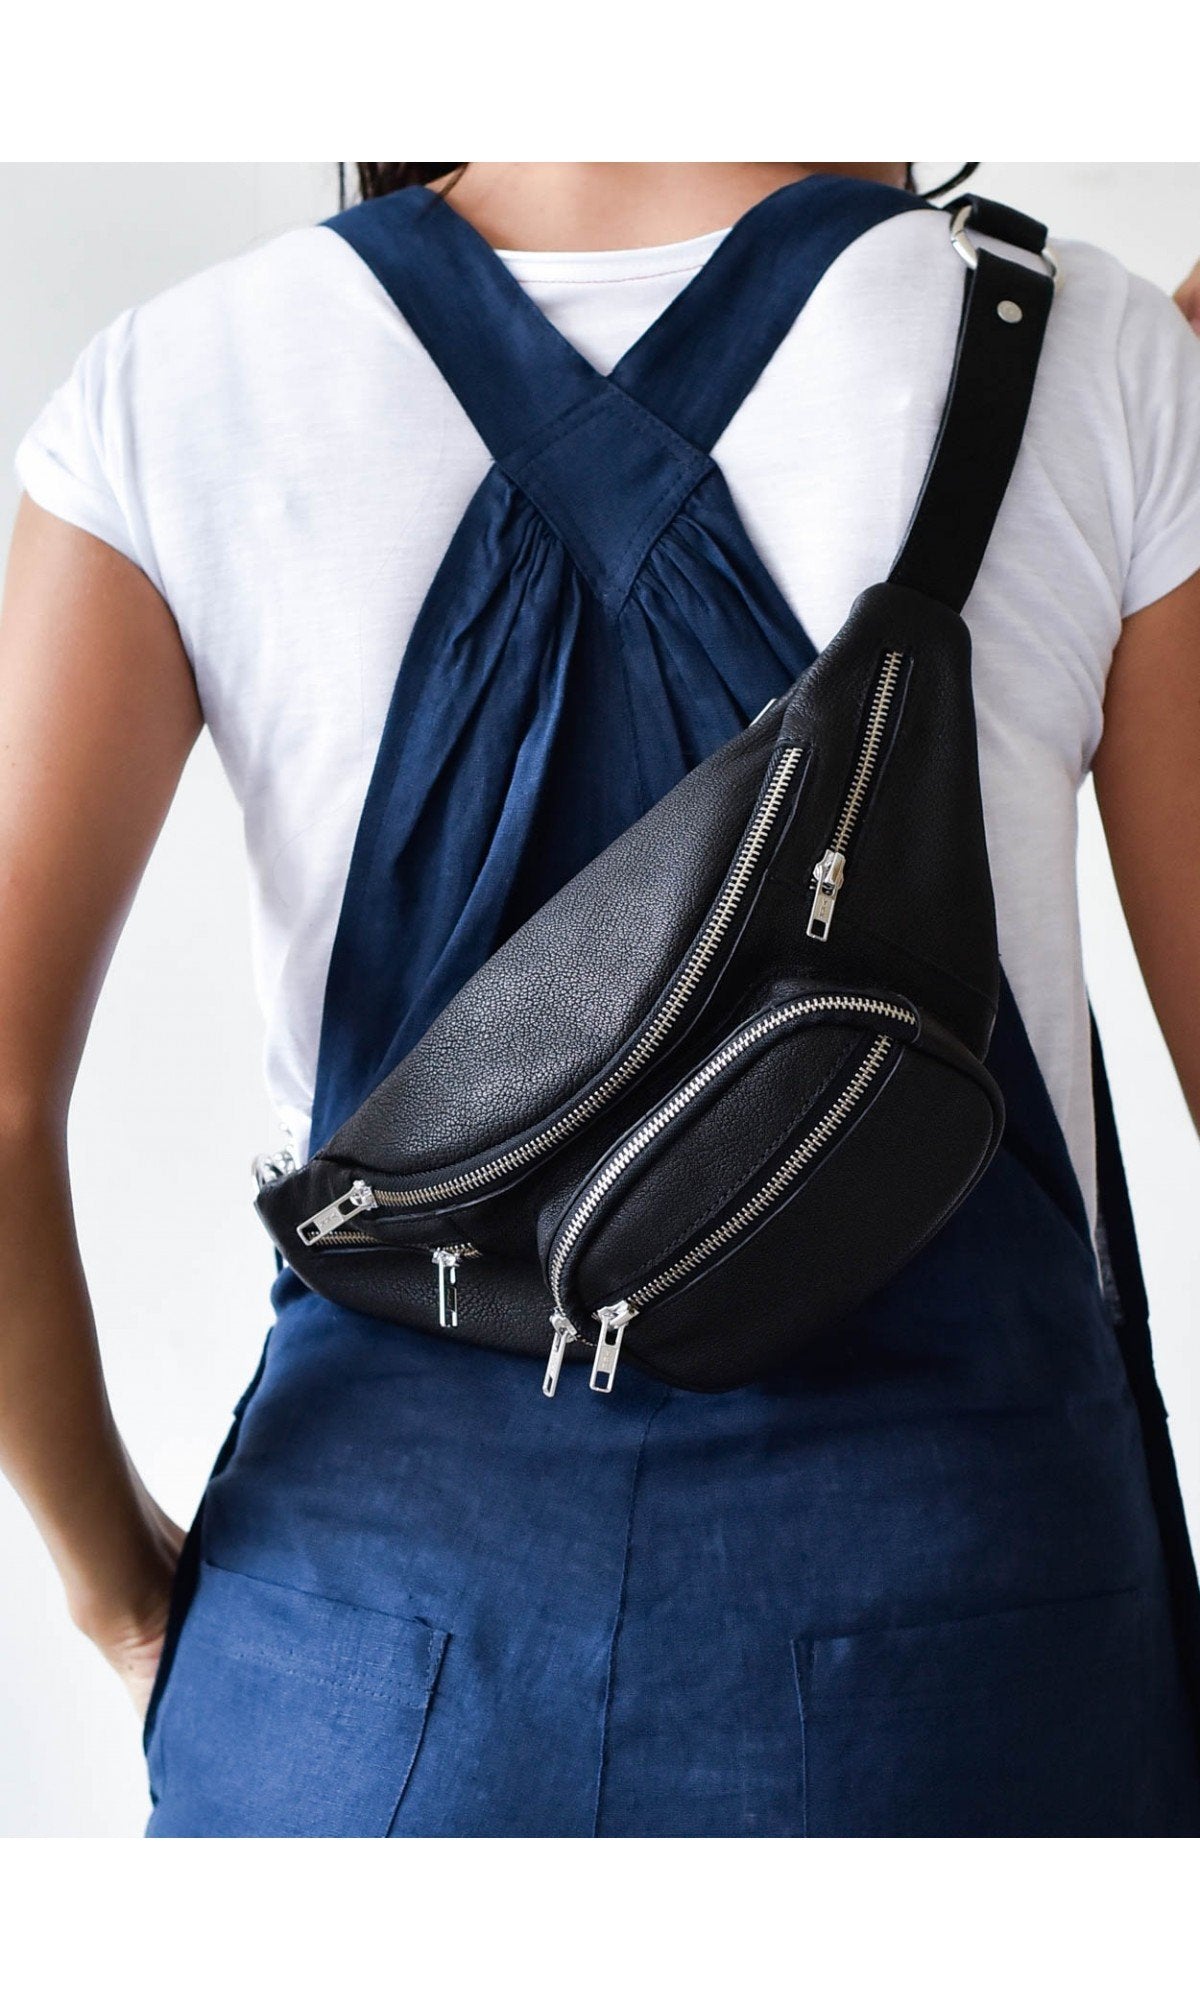 Leather Bum Bag with Zipper Pockets